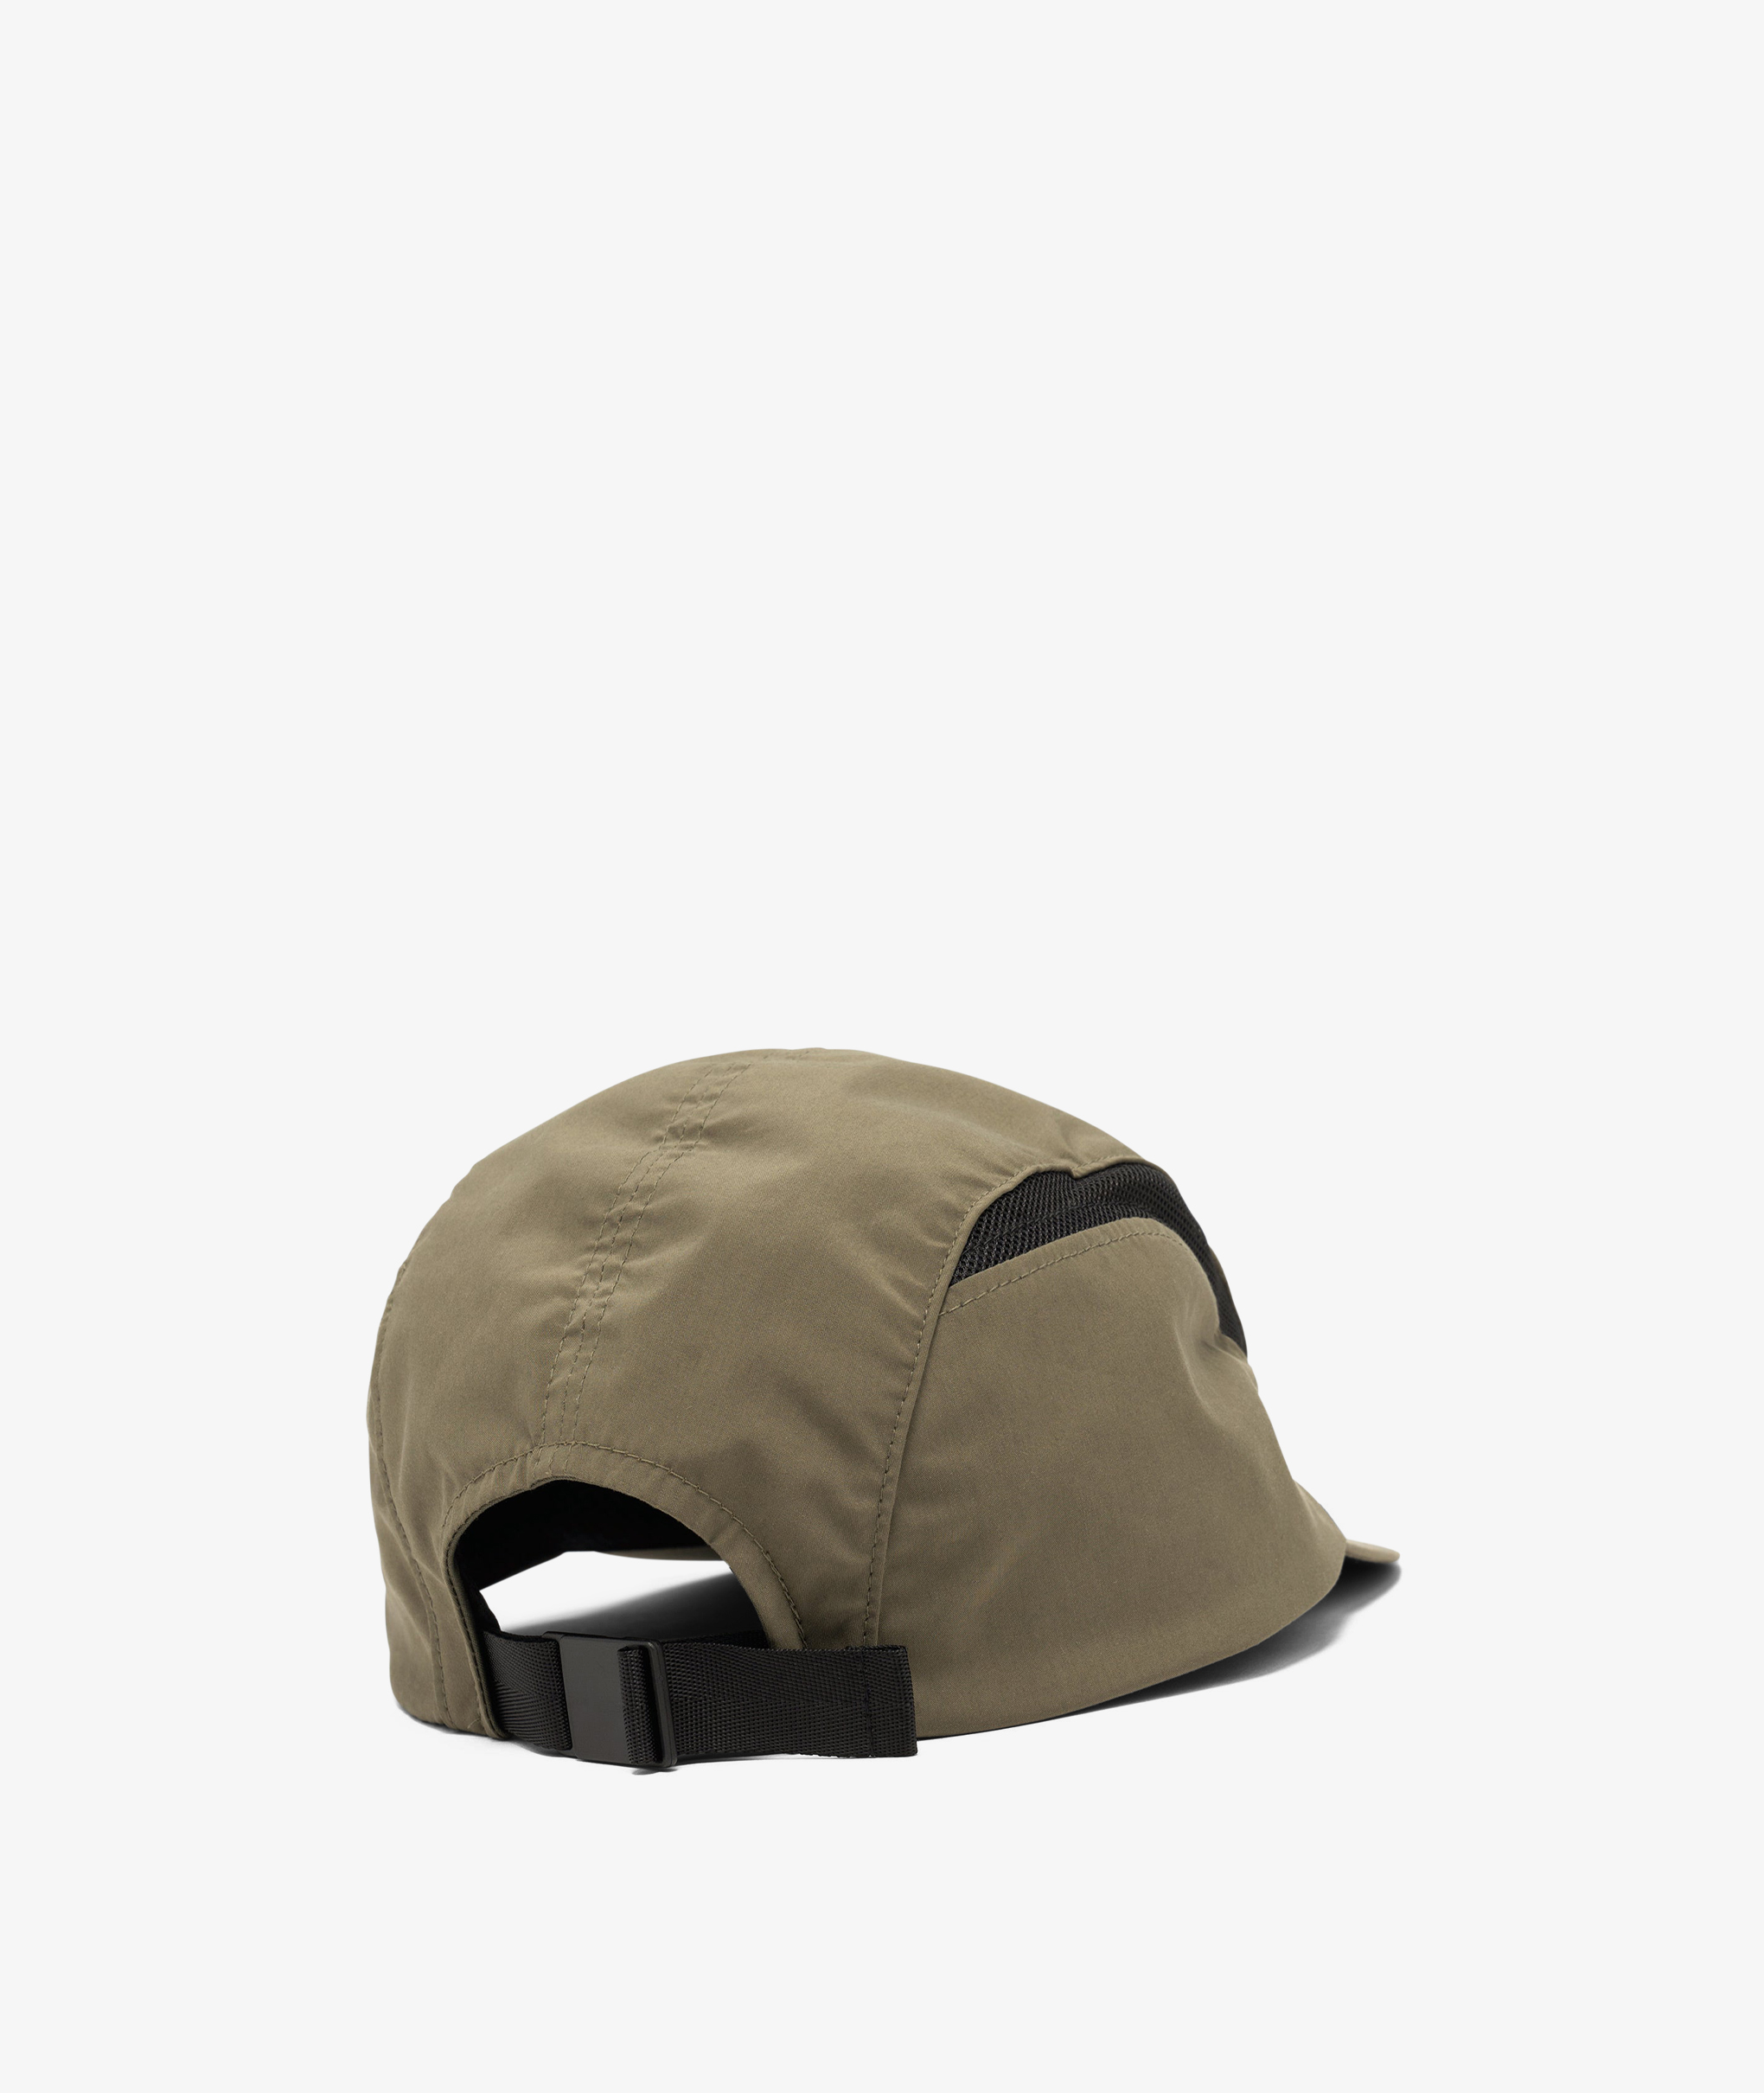 Norse Store | Shipping Worldwide - Haven Ozone Cap - Olive